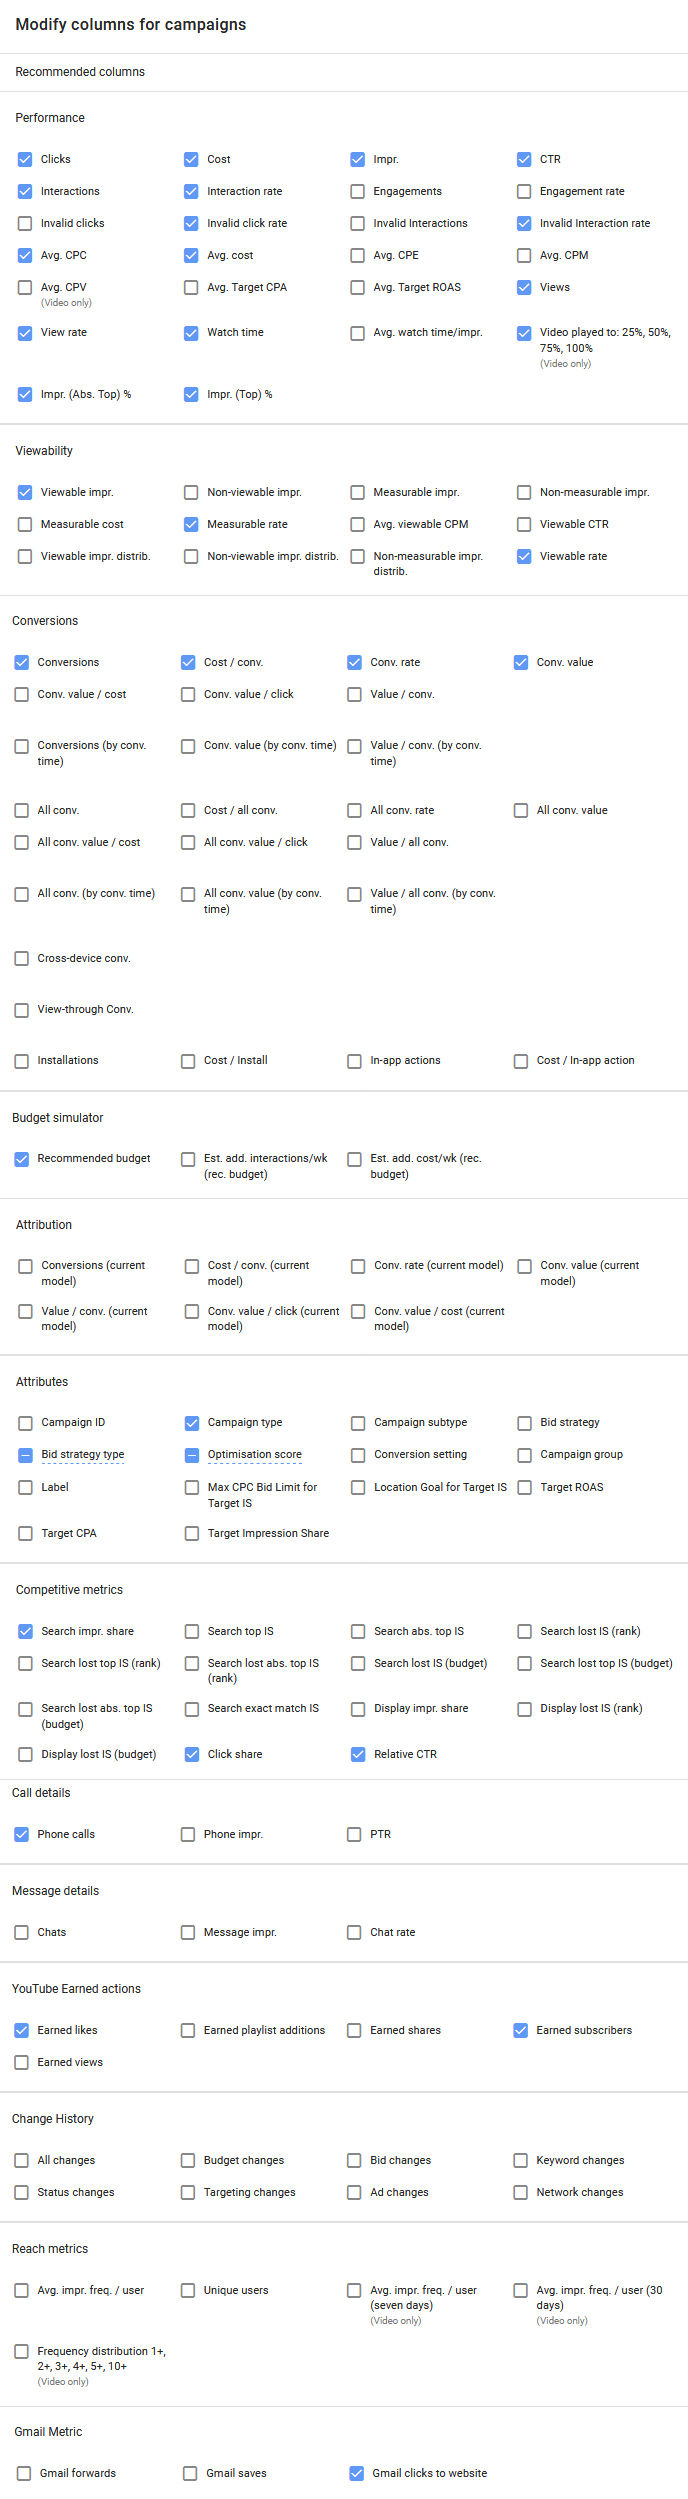 Reporting data points in Google Ads